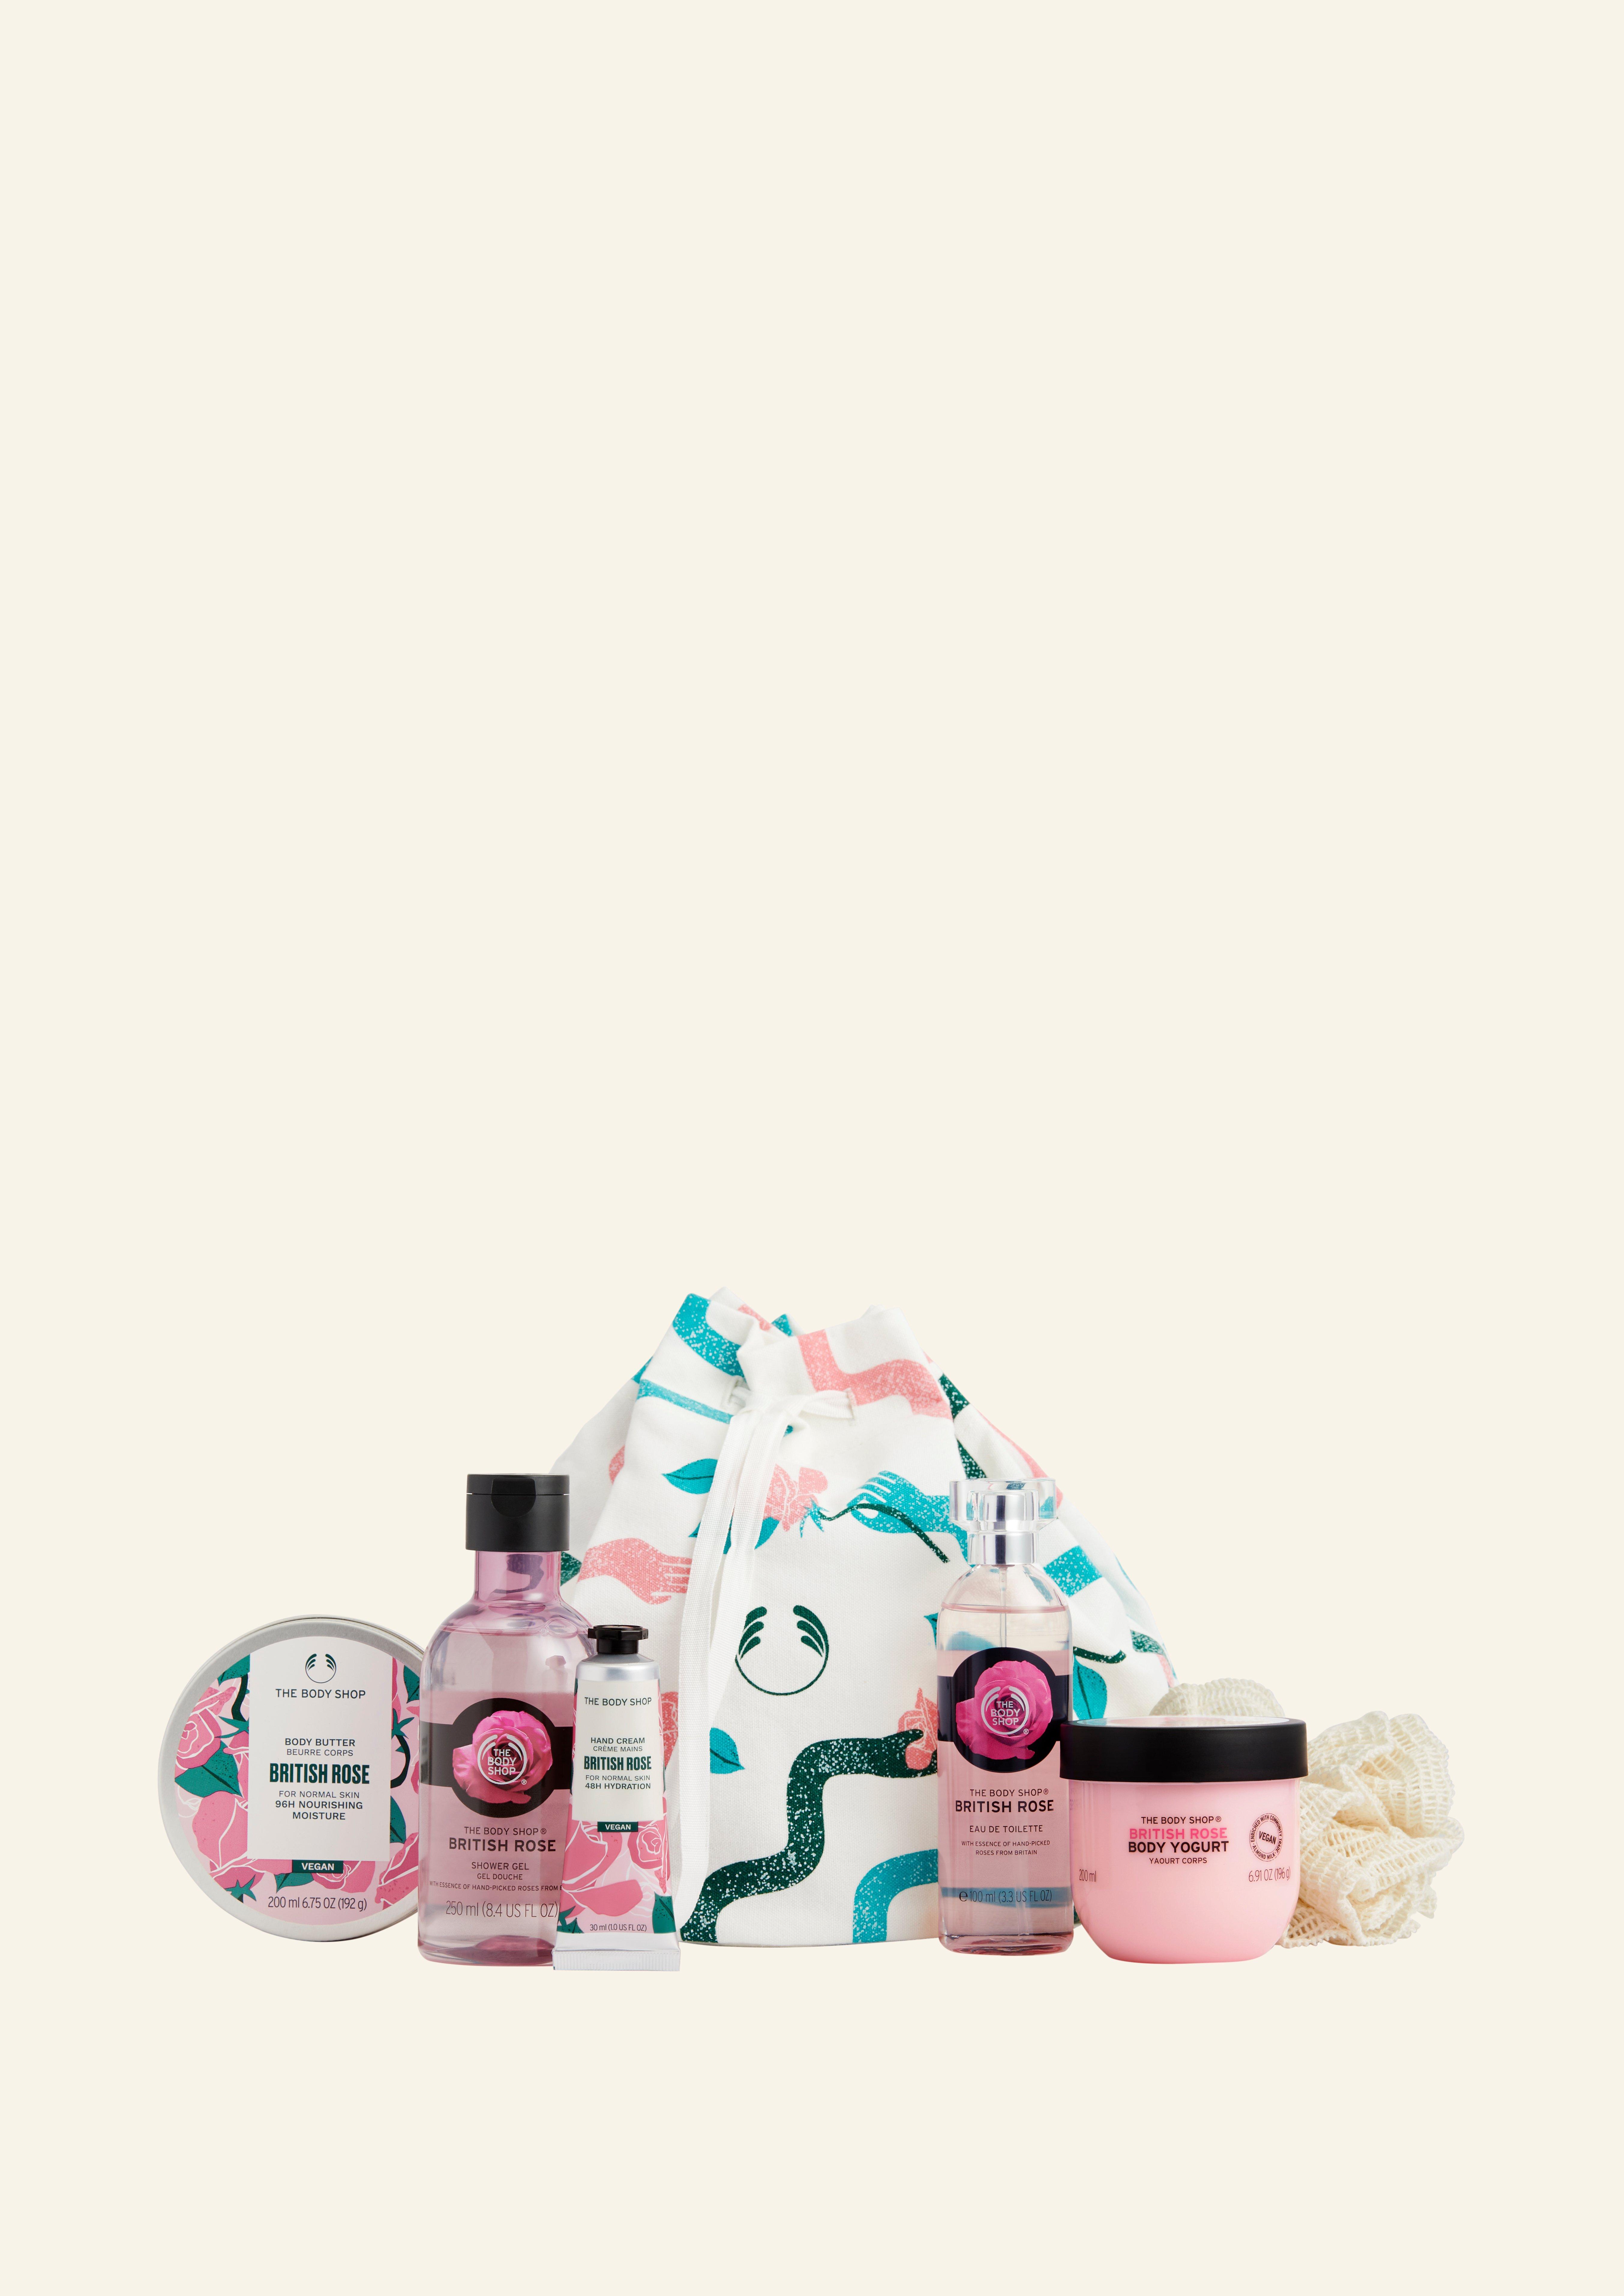 THE BODY SHOP BRITISH ROSE BODY CARE COLLECTION - Beautygeeks